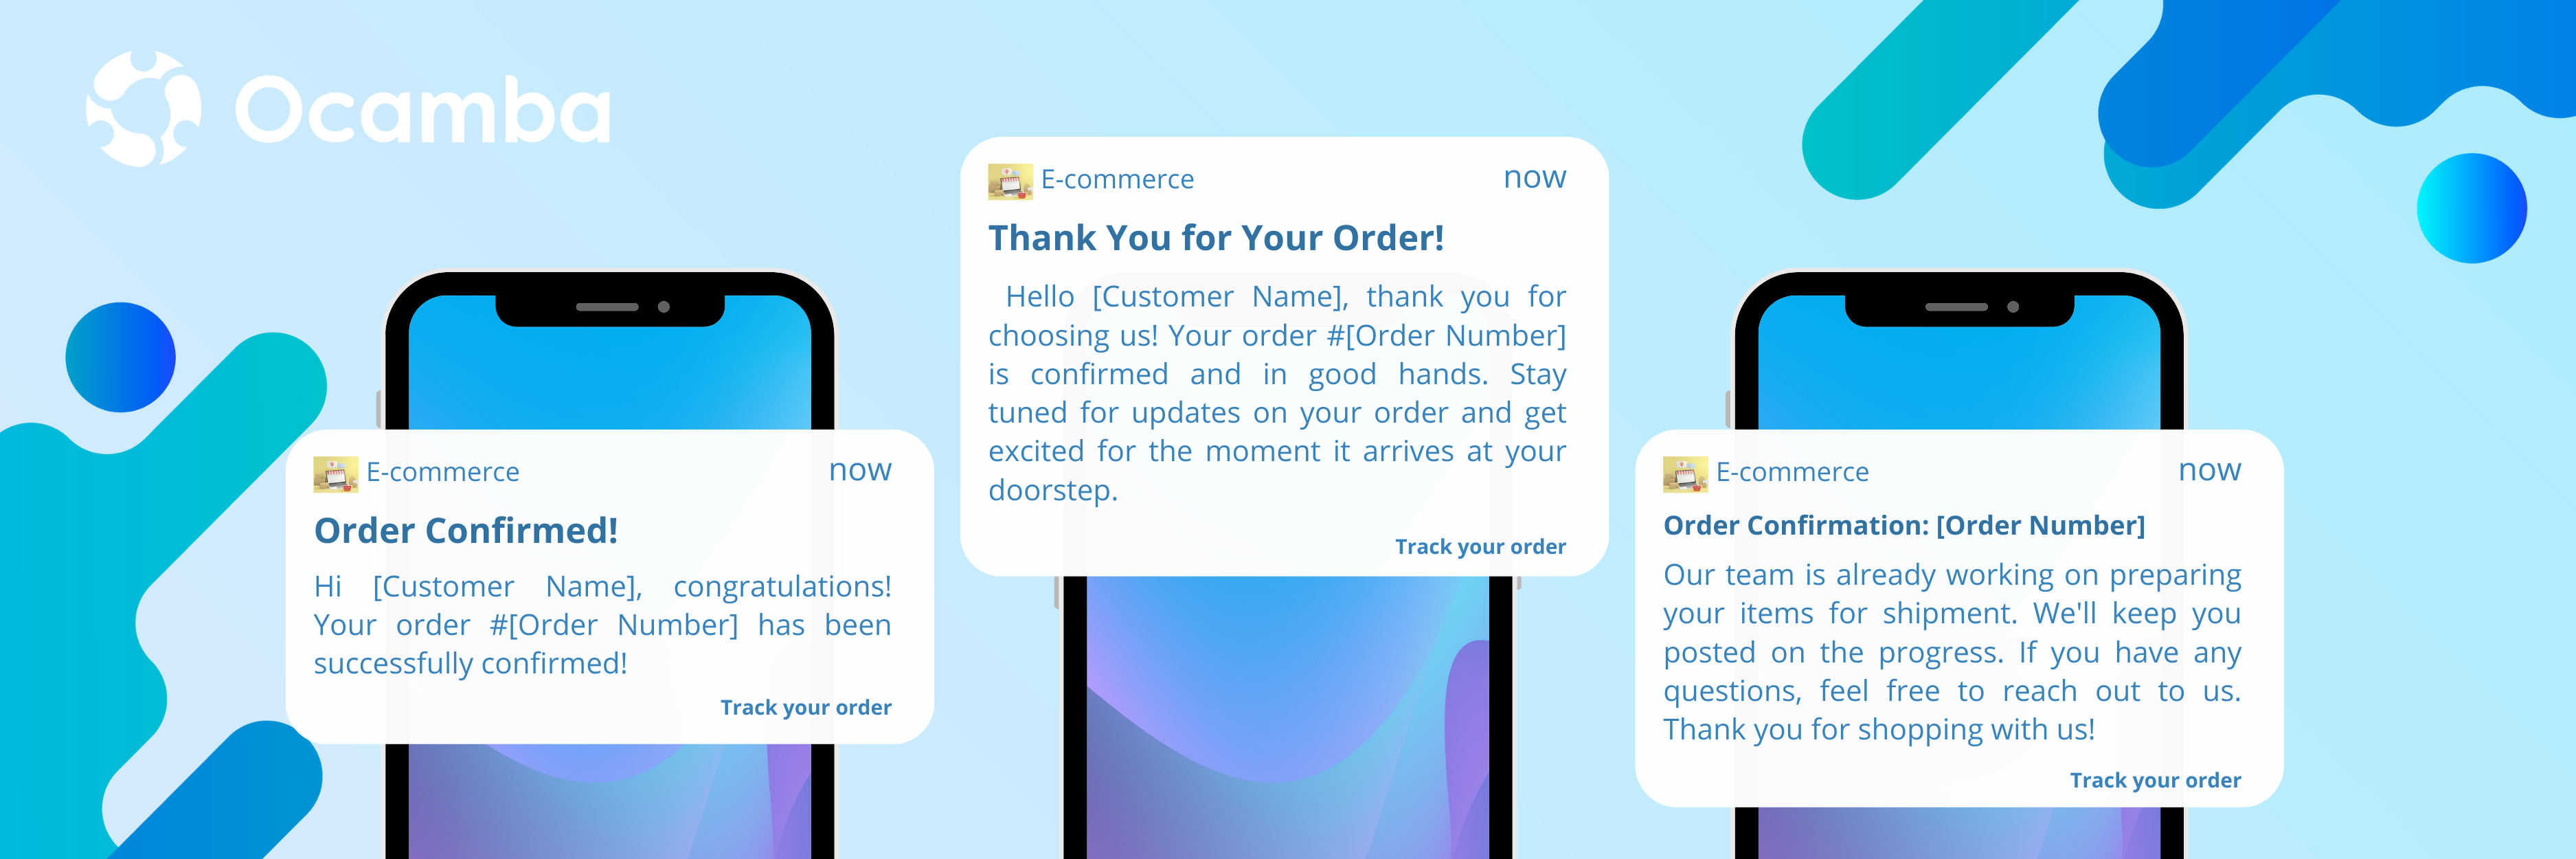 Ecommerce push notifications templates for order confirmation